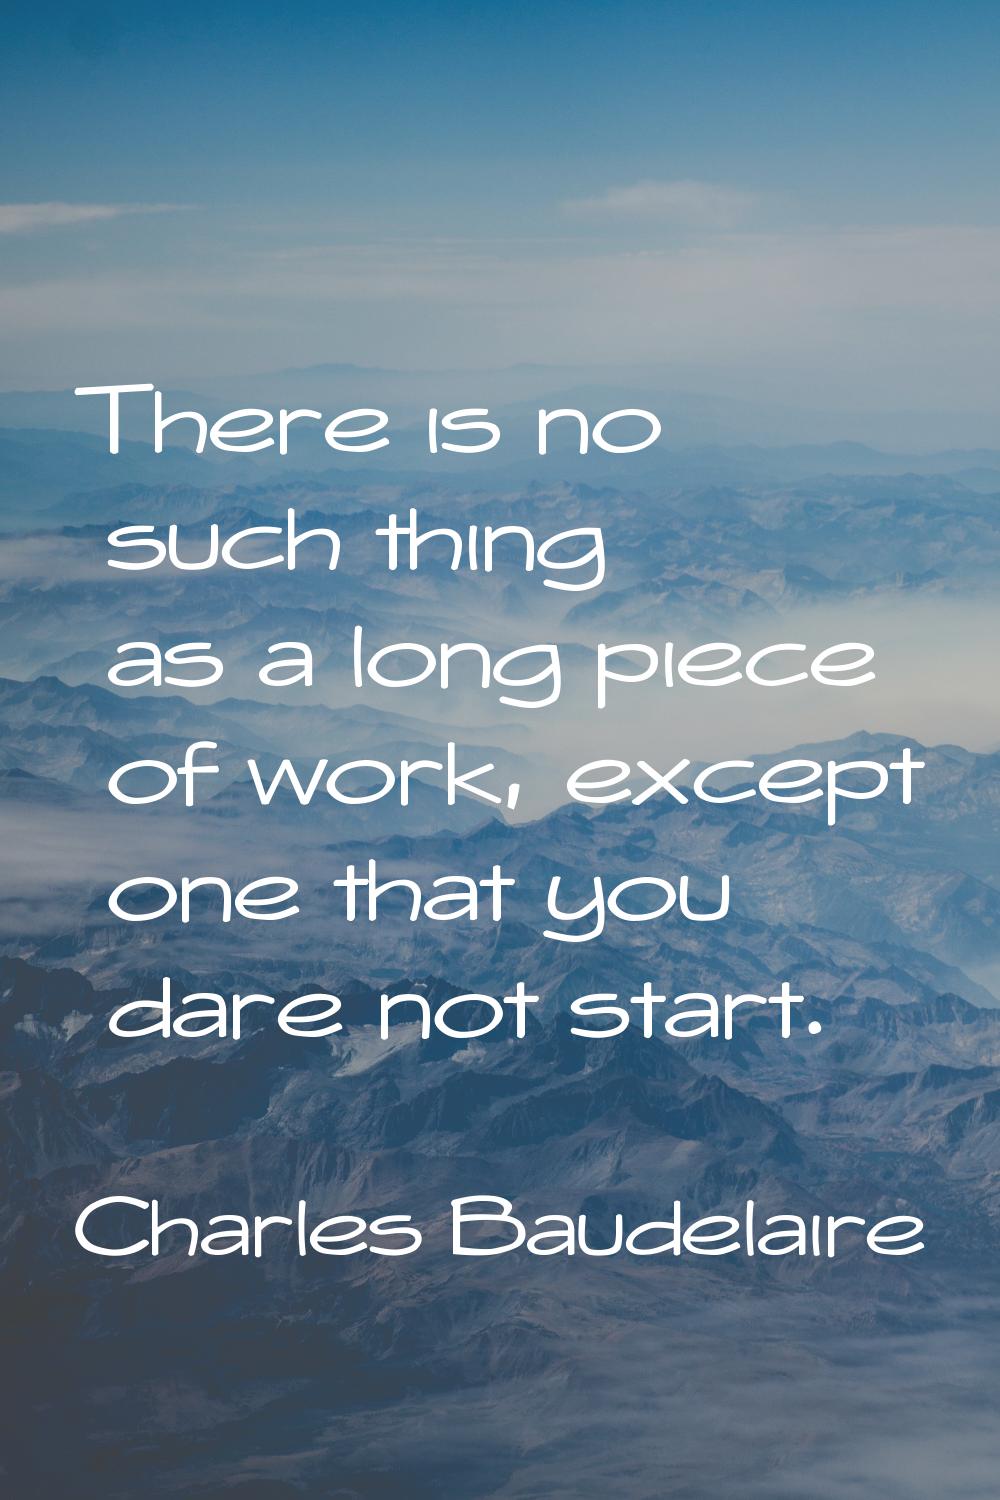 There is no such thing as a long piece of work, except one that you dare not start.